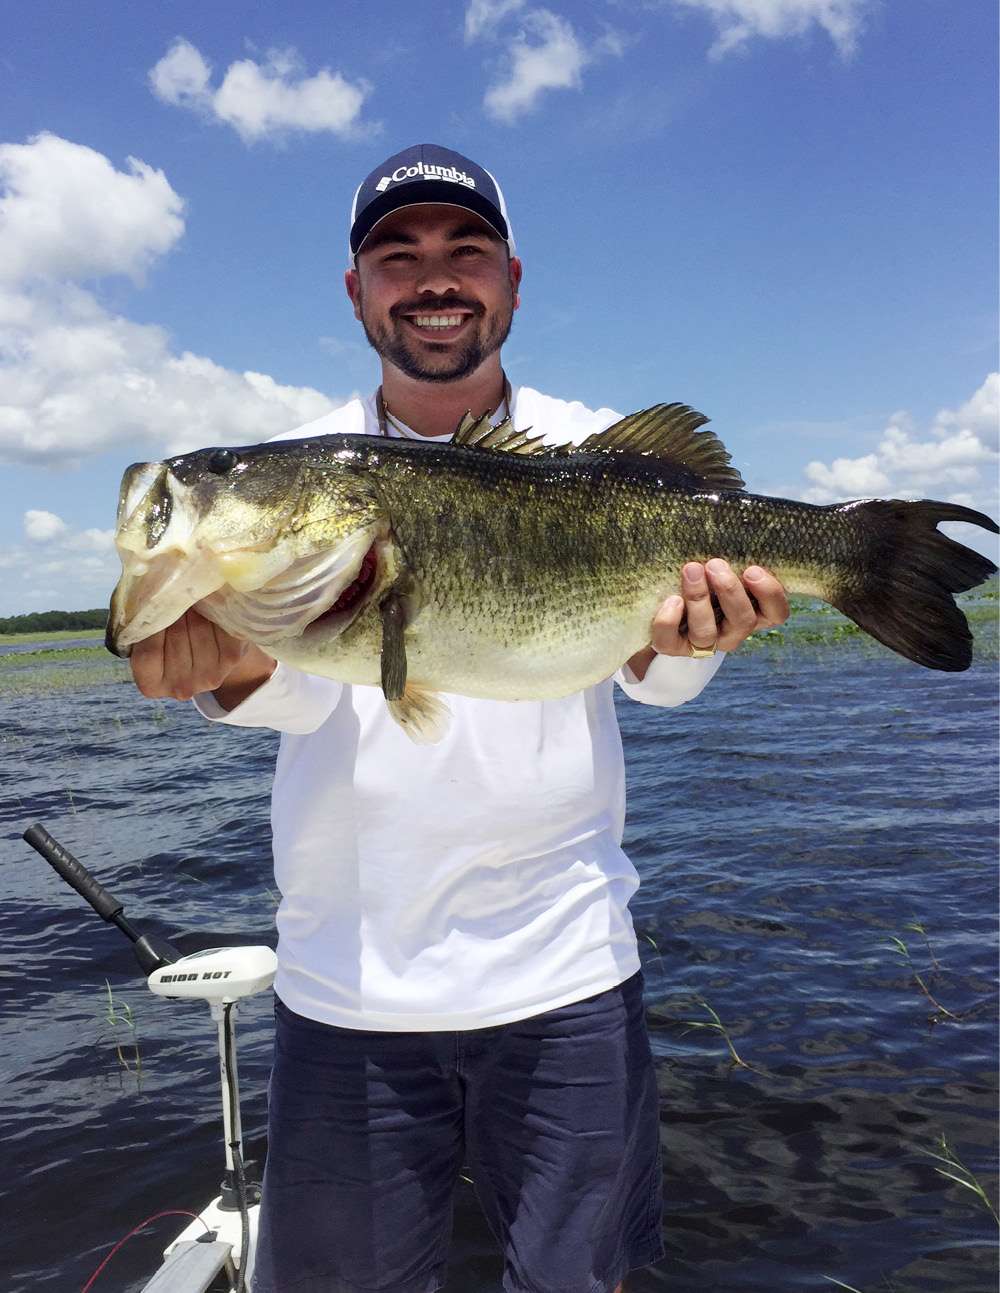 Kevin Dame<br>
Florida<br>
10-2<br>
Lake Kissimmee, Fla. <br>
1/2-ounce Z-Man ChatterBait Elite<br>
Water clarity: stained<br>
Depth: 3 feet<br>
Weather: overcast, windy